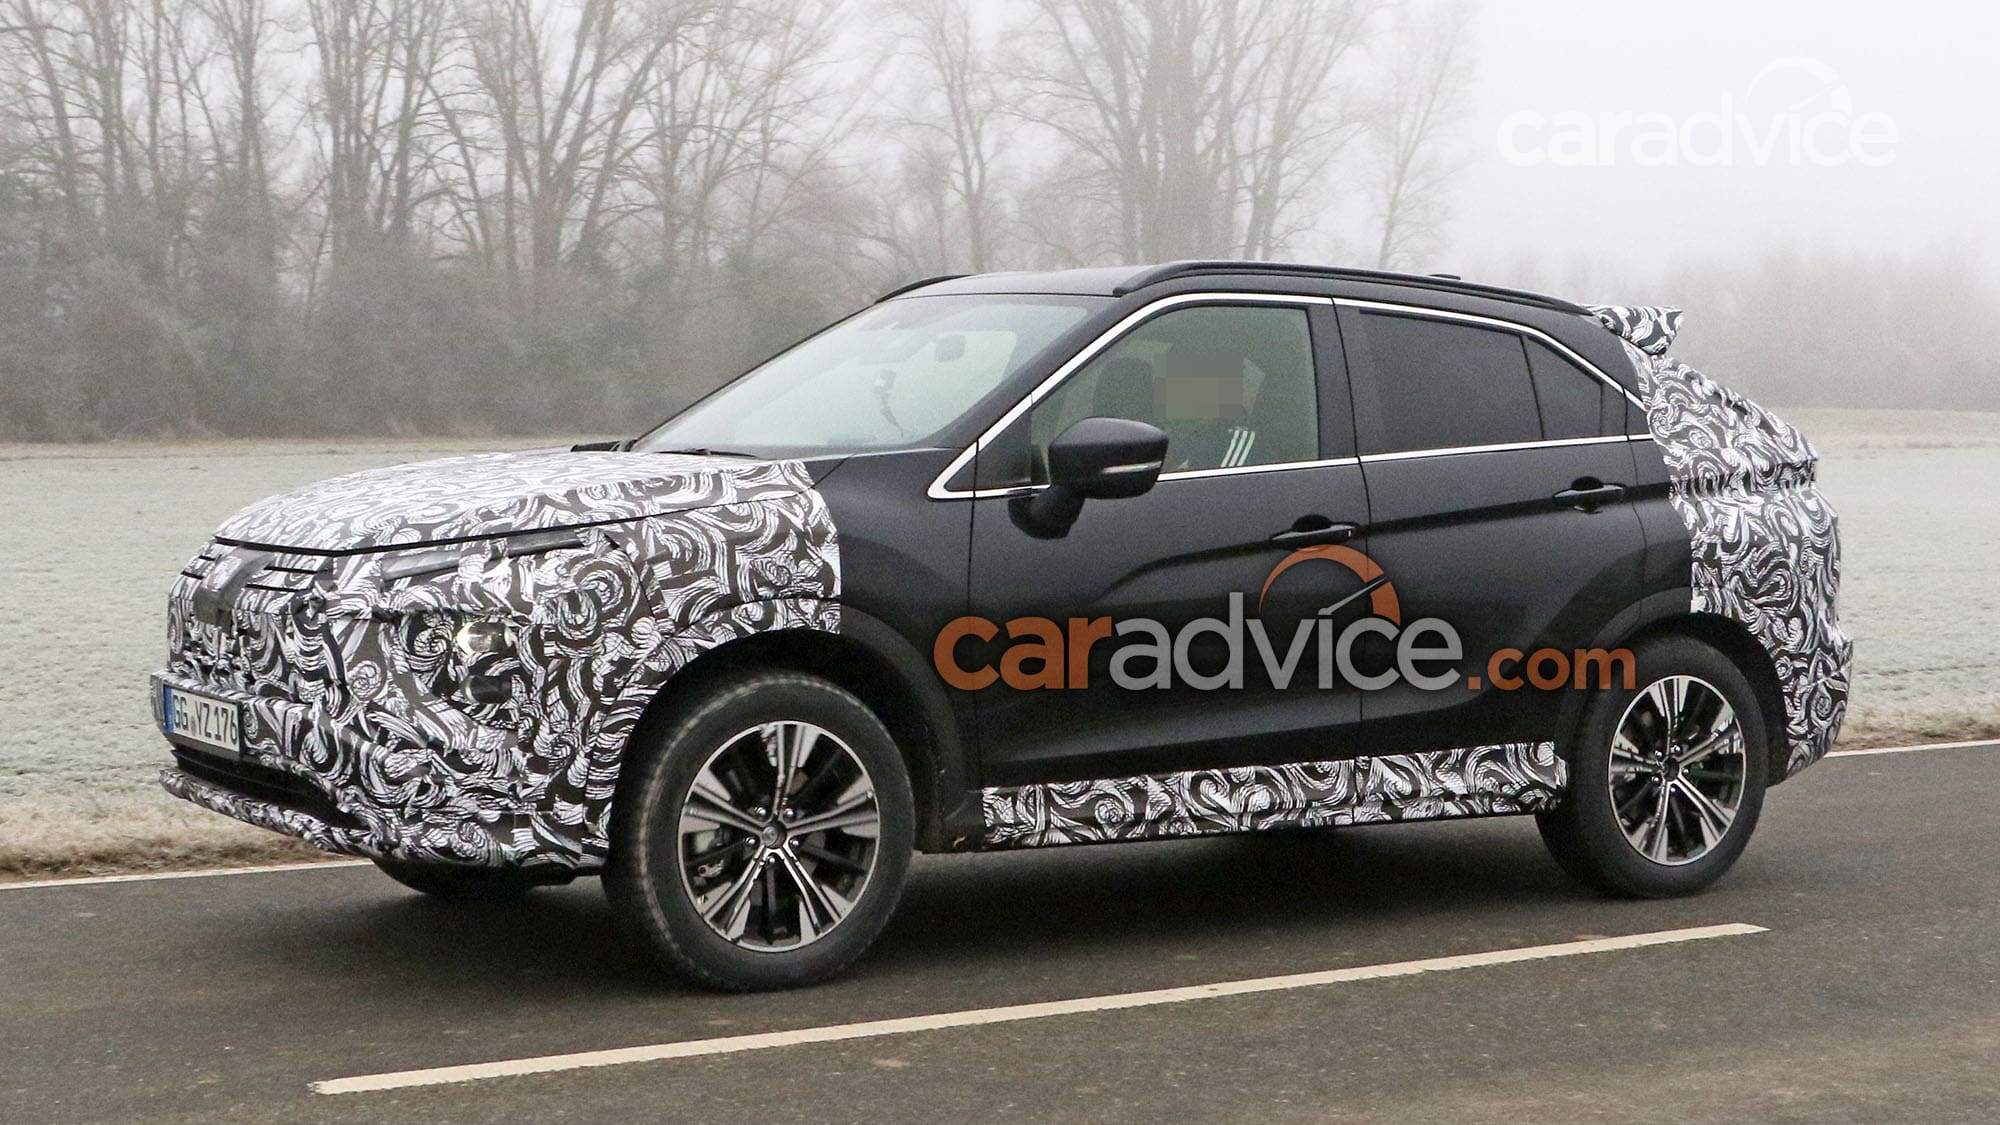 2021 Mitsubishi Eclipse Cross facelift spied | CarAdvice